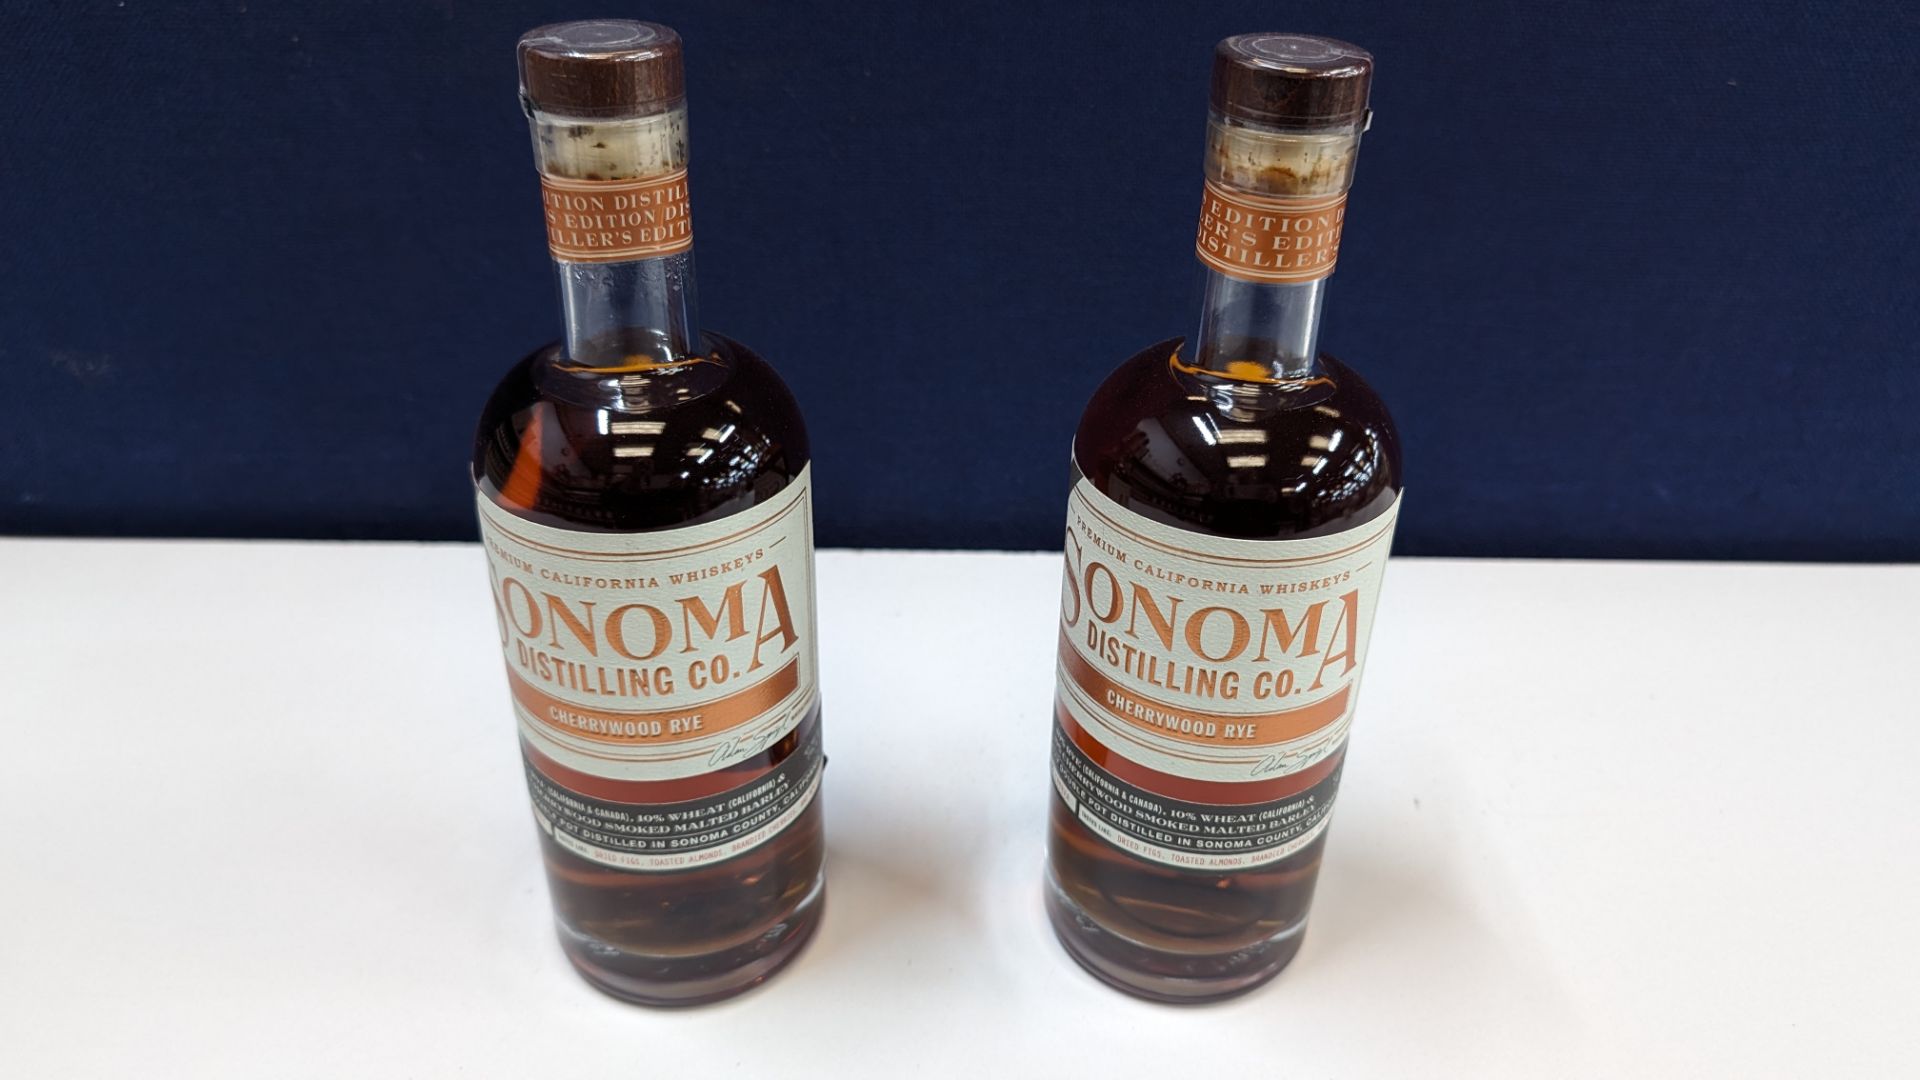 2 off 700ml bottles of Sonoma Cherrywood Rye Whiskey. 47.8% alc/vol (95.6 proof). Distilled and bo